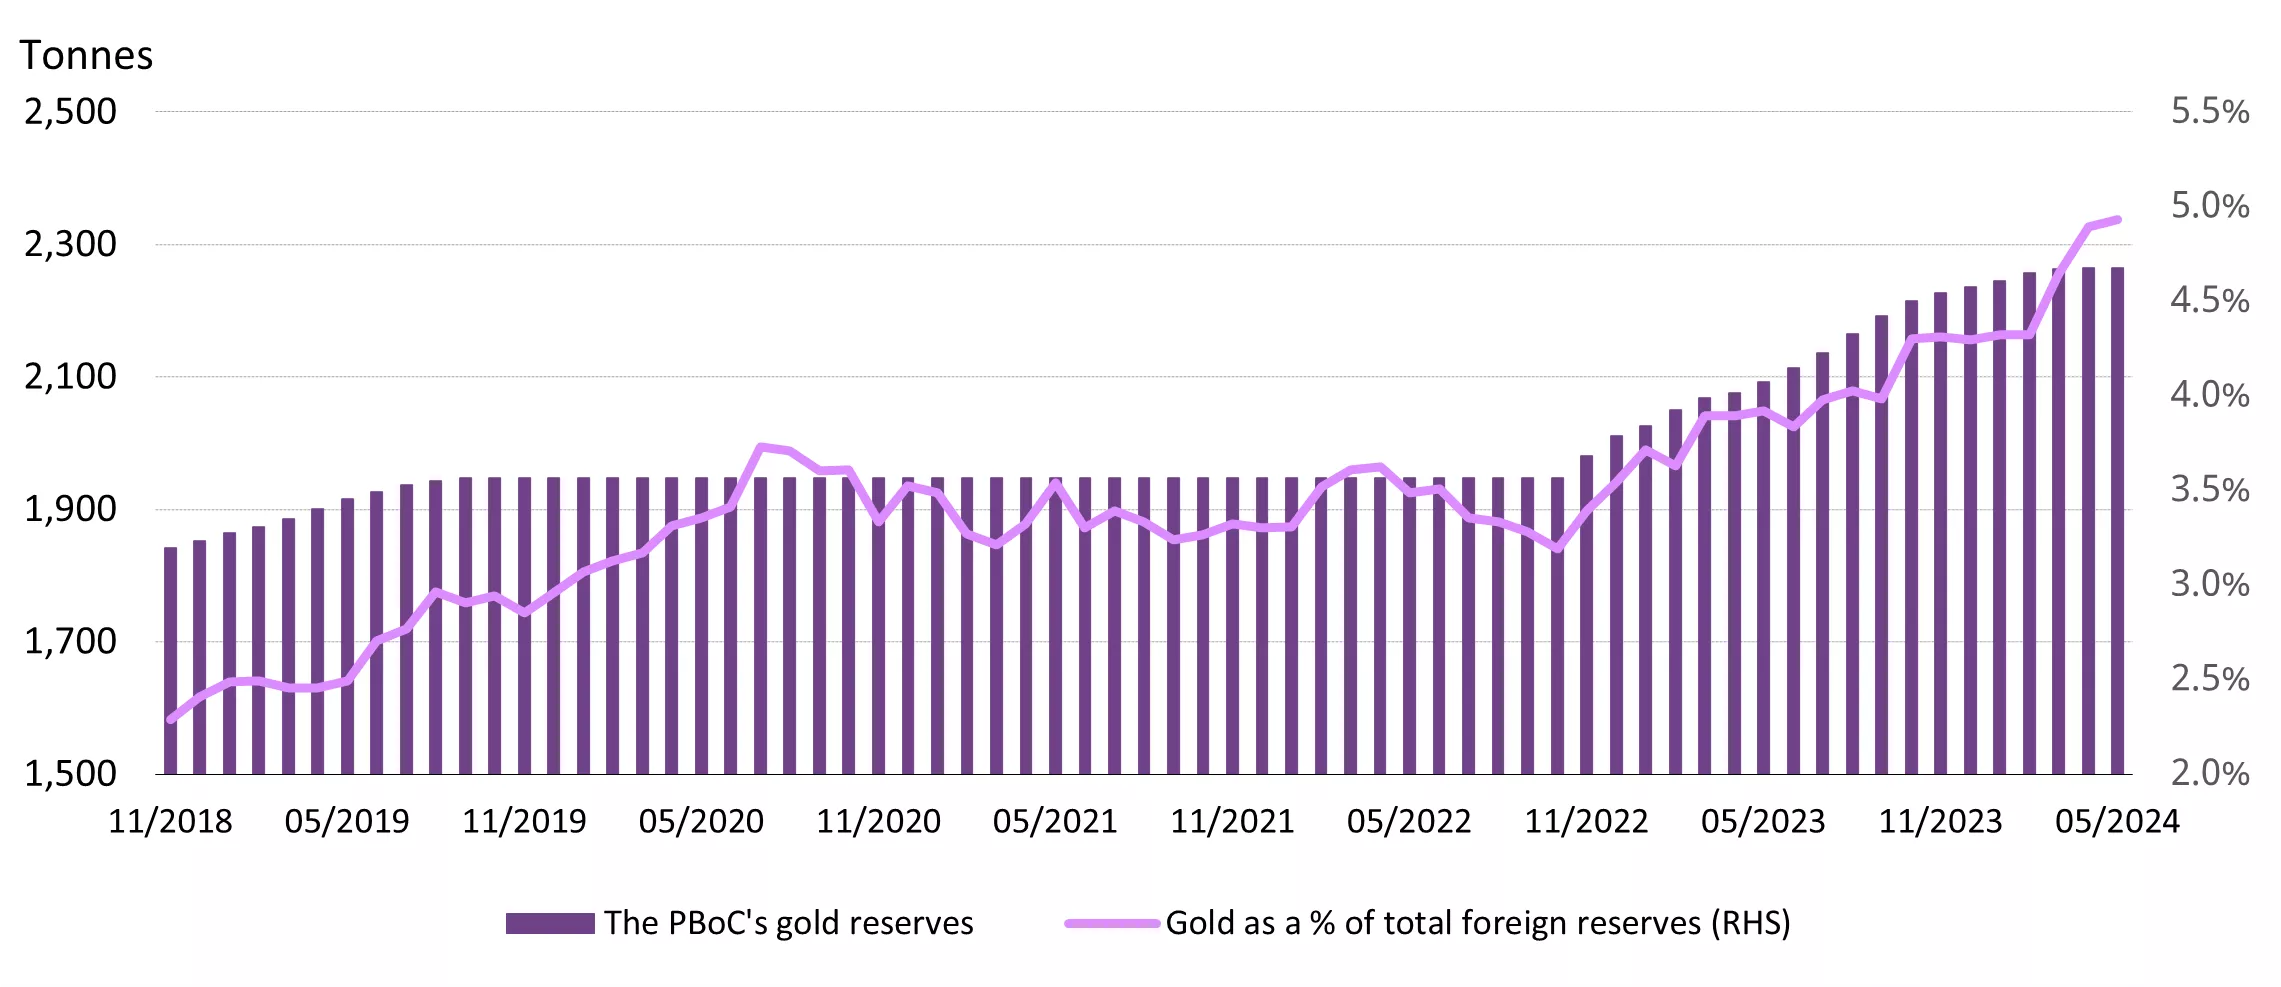 old’s share of China’s reserves saw no change in May 